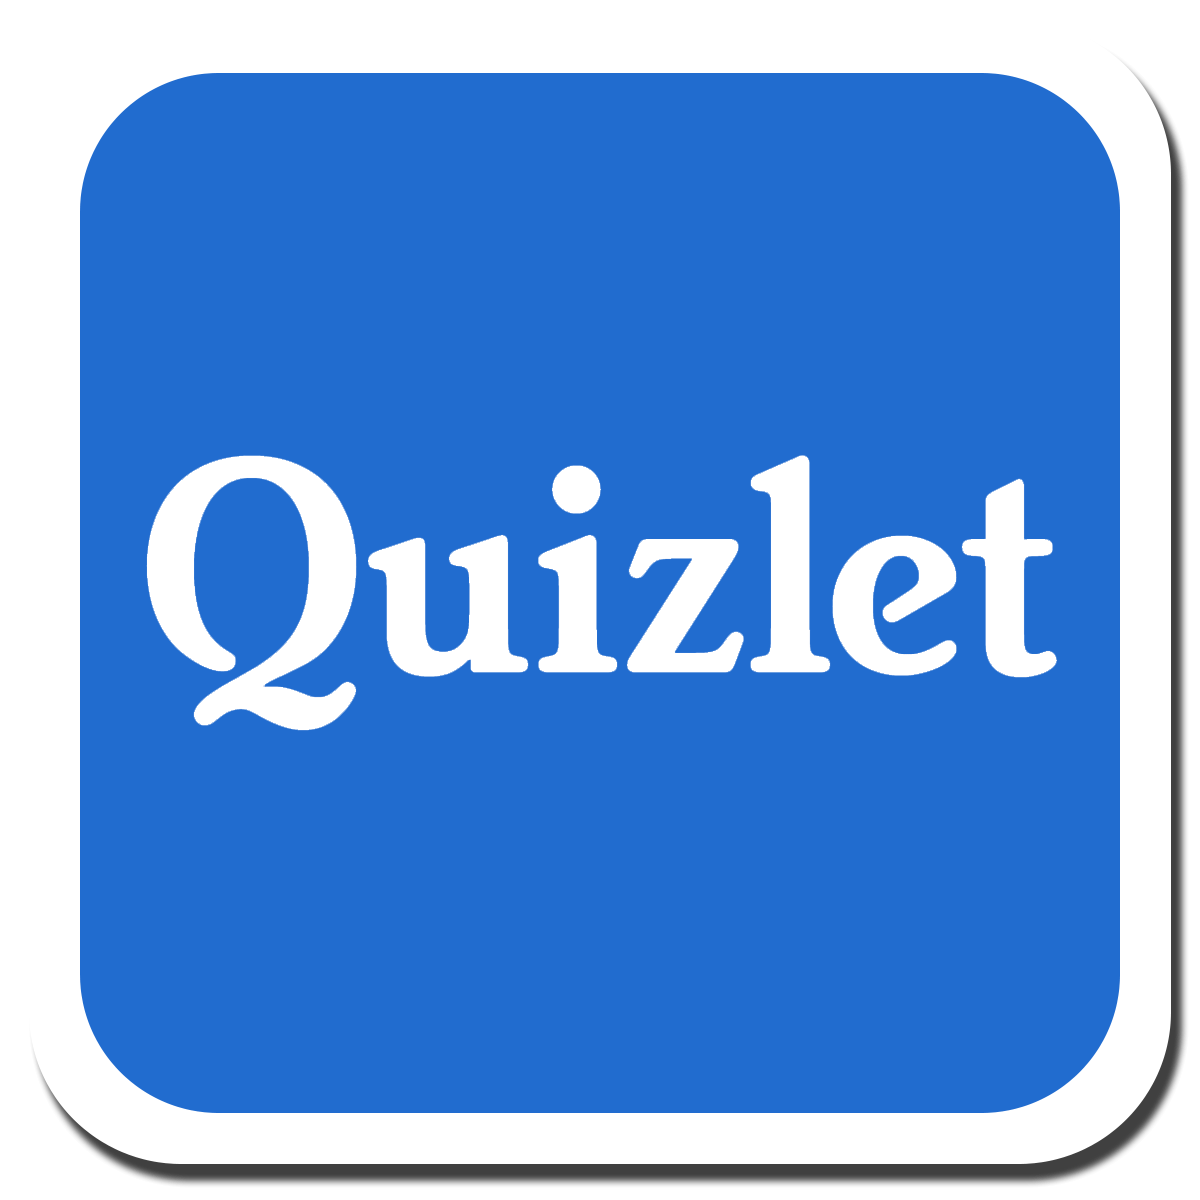 presentation of information on a package quizlet